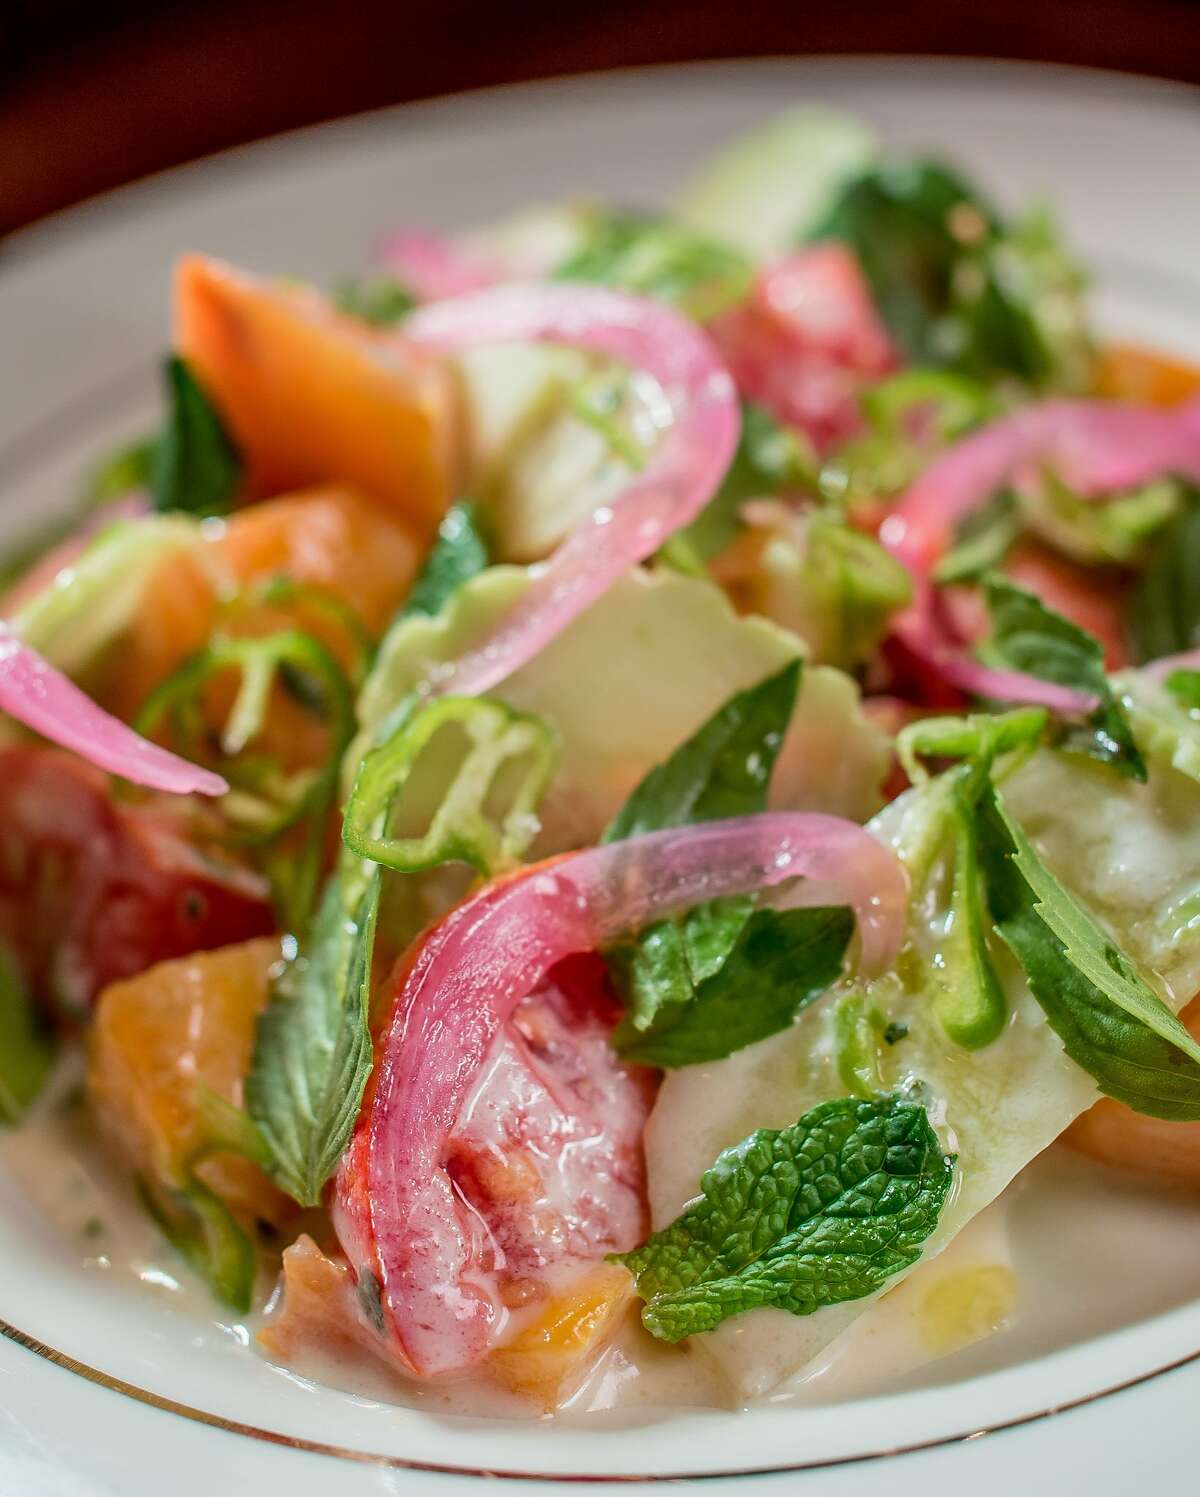 The Tomato Salad at the Viking Room in San Francisco, Calif., is seen on August 14th, 2015.